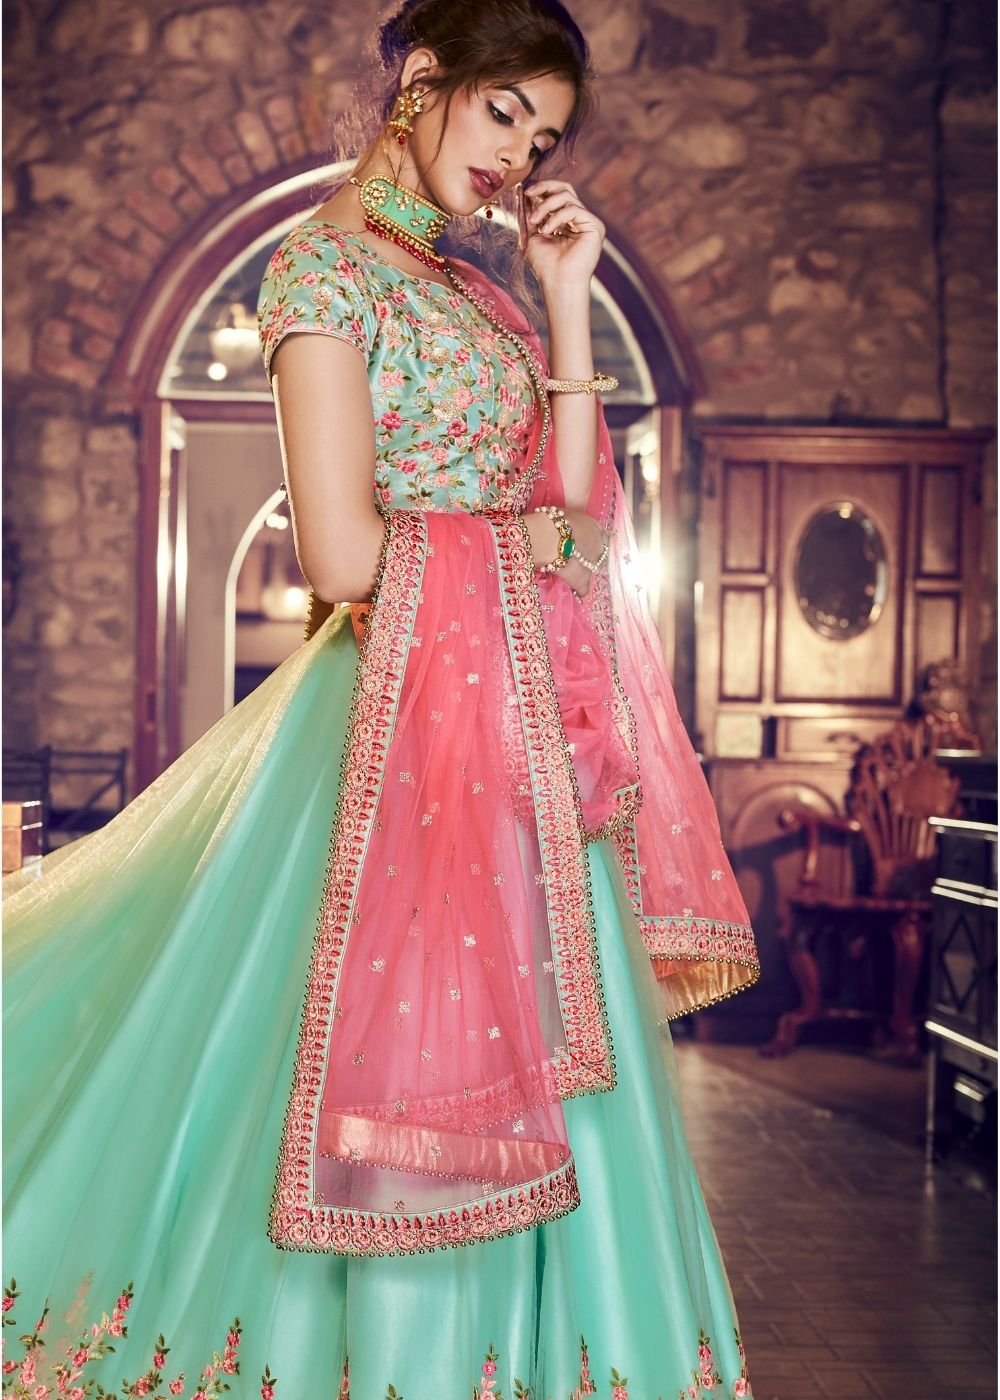 Sea Green Double Layered Satin and Net Lehenga with Floral Resham Embroidery work